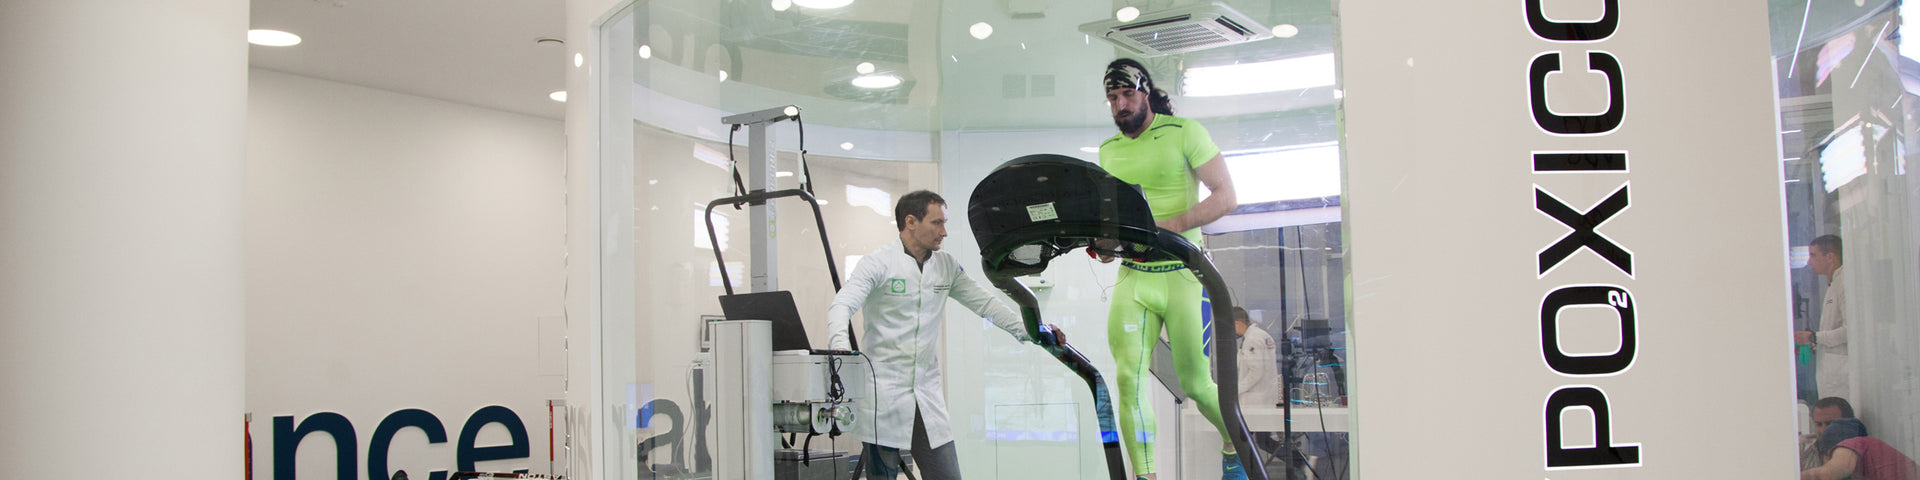 Man on treadmill being monitored by scientist